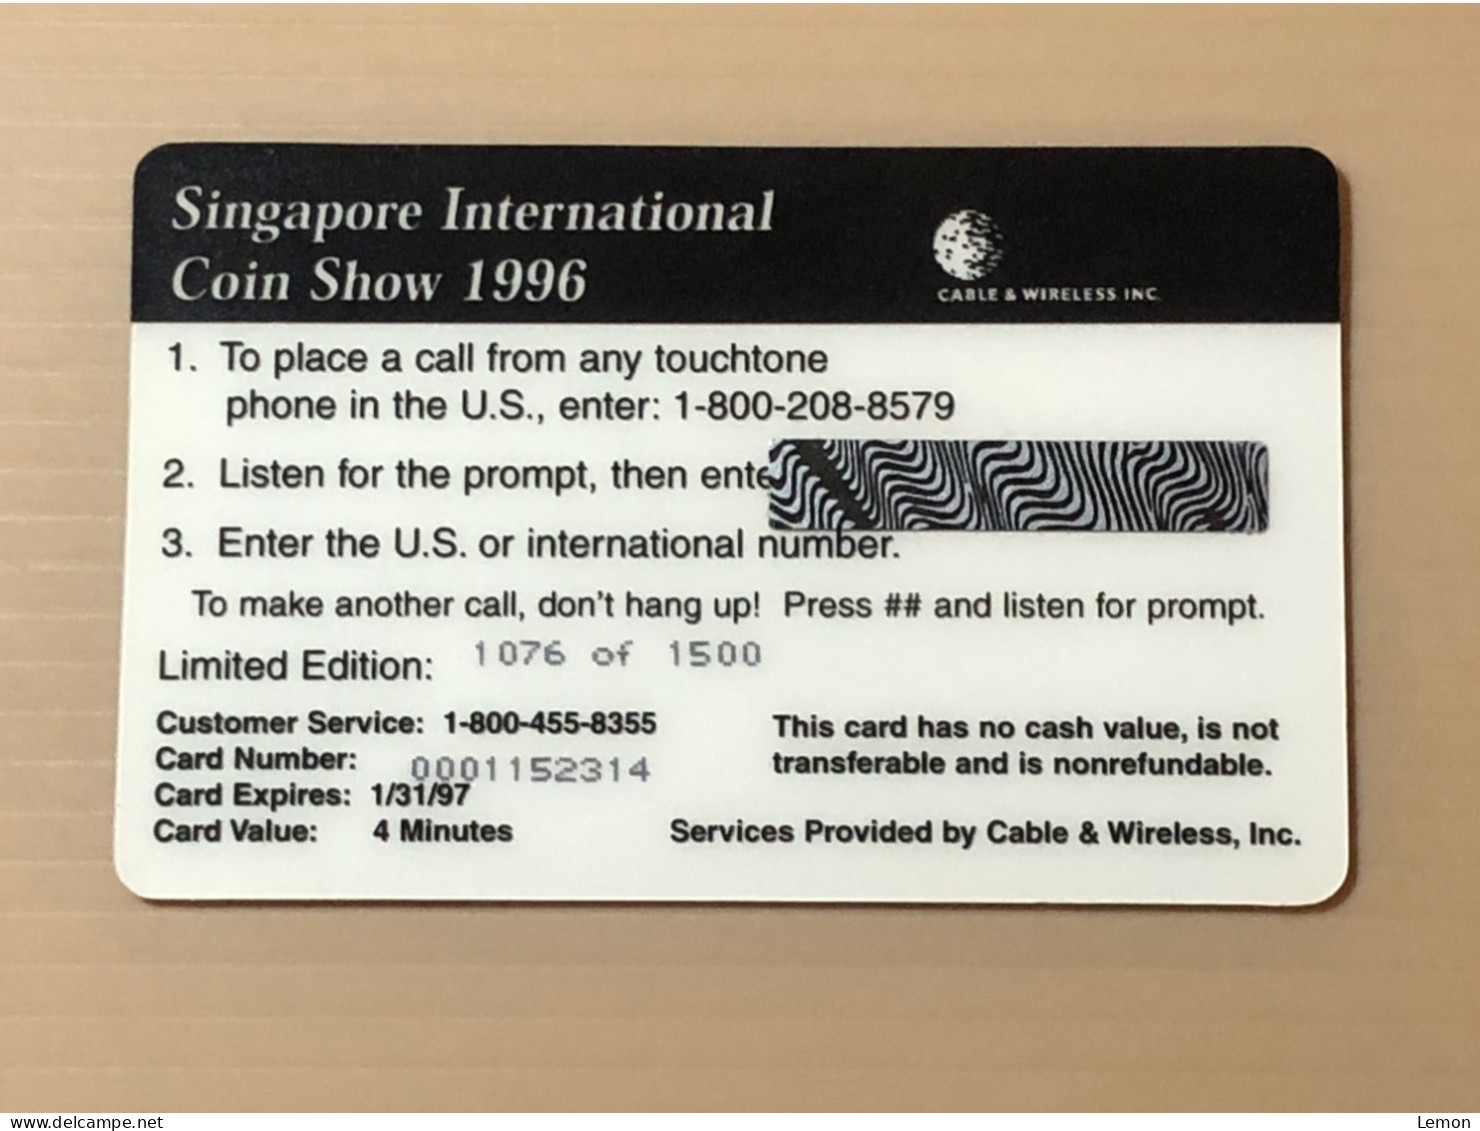 Mint USA UNITED STATES America Prepaid Telecard Phonecard, Singapore International Coin Show(1500EX), Set Of 1 Mint Card - Collections